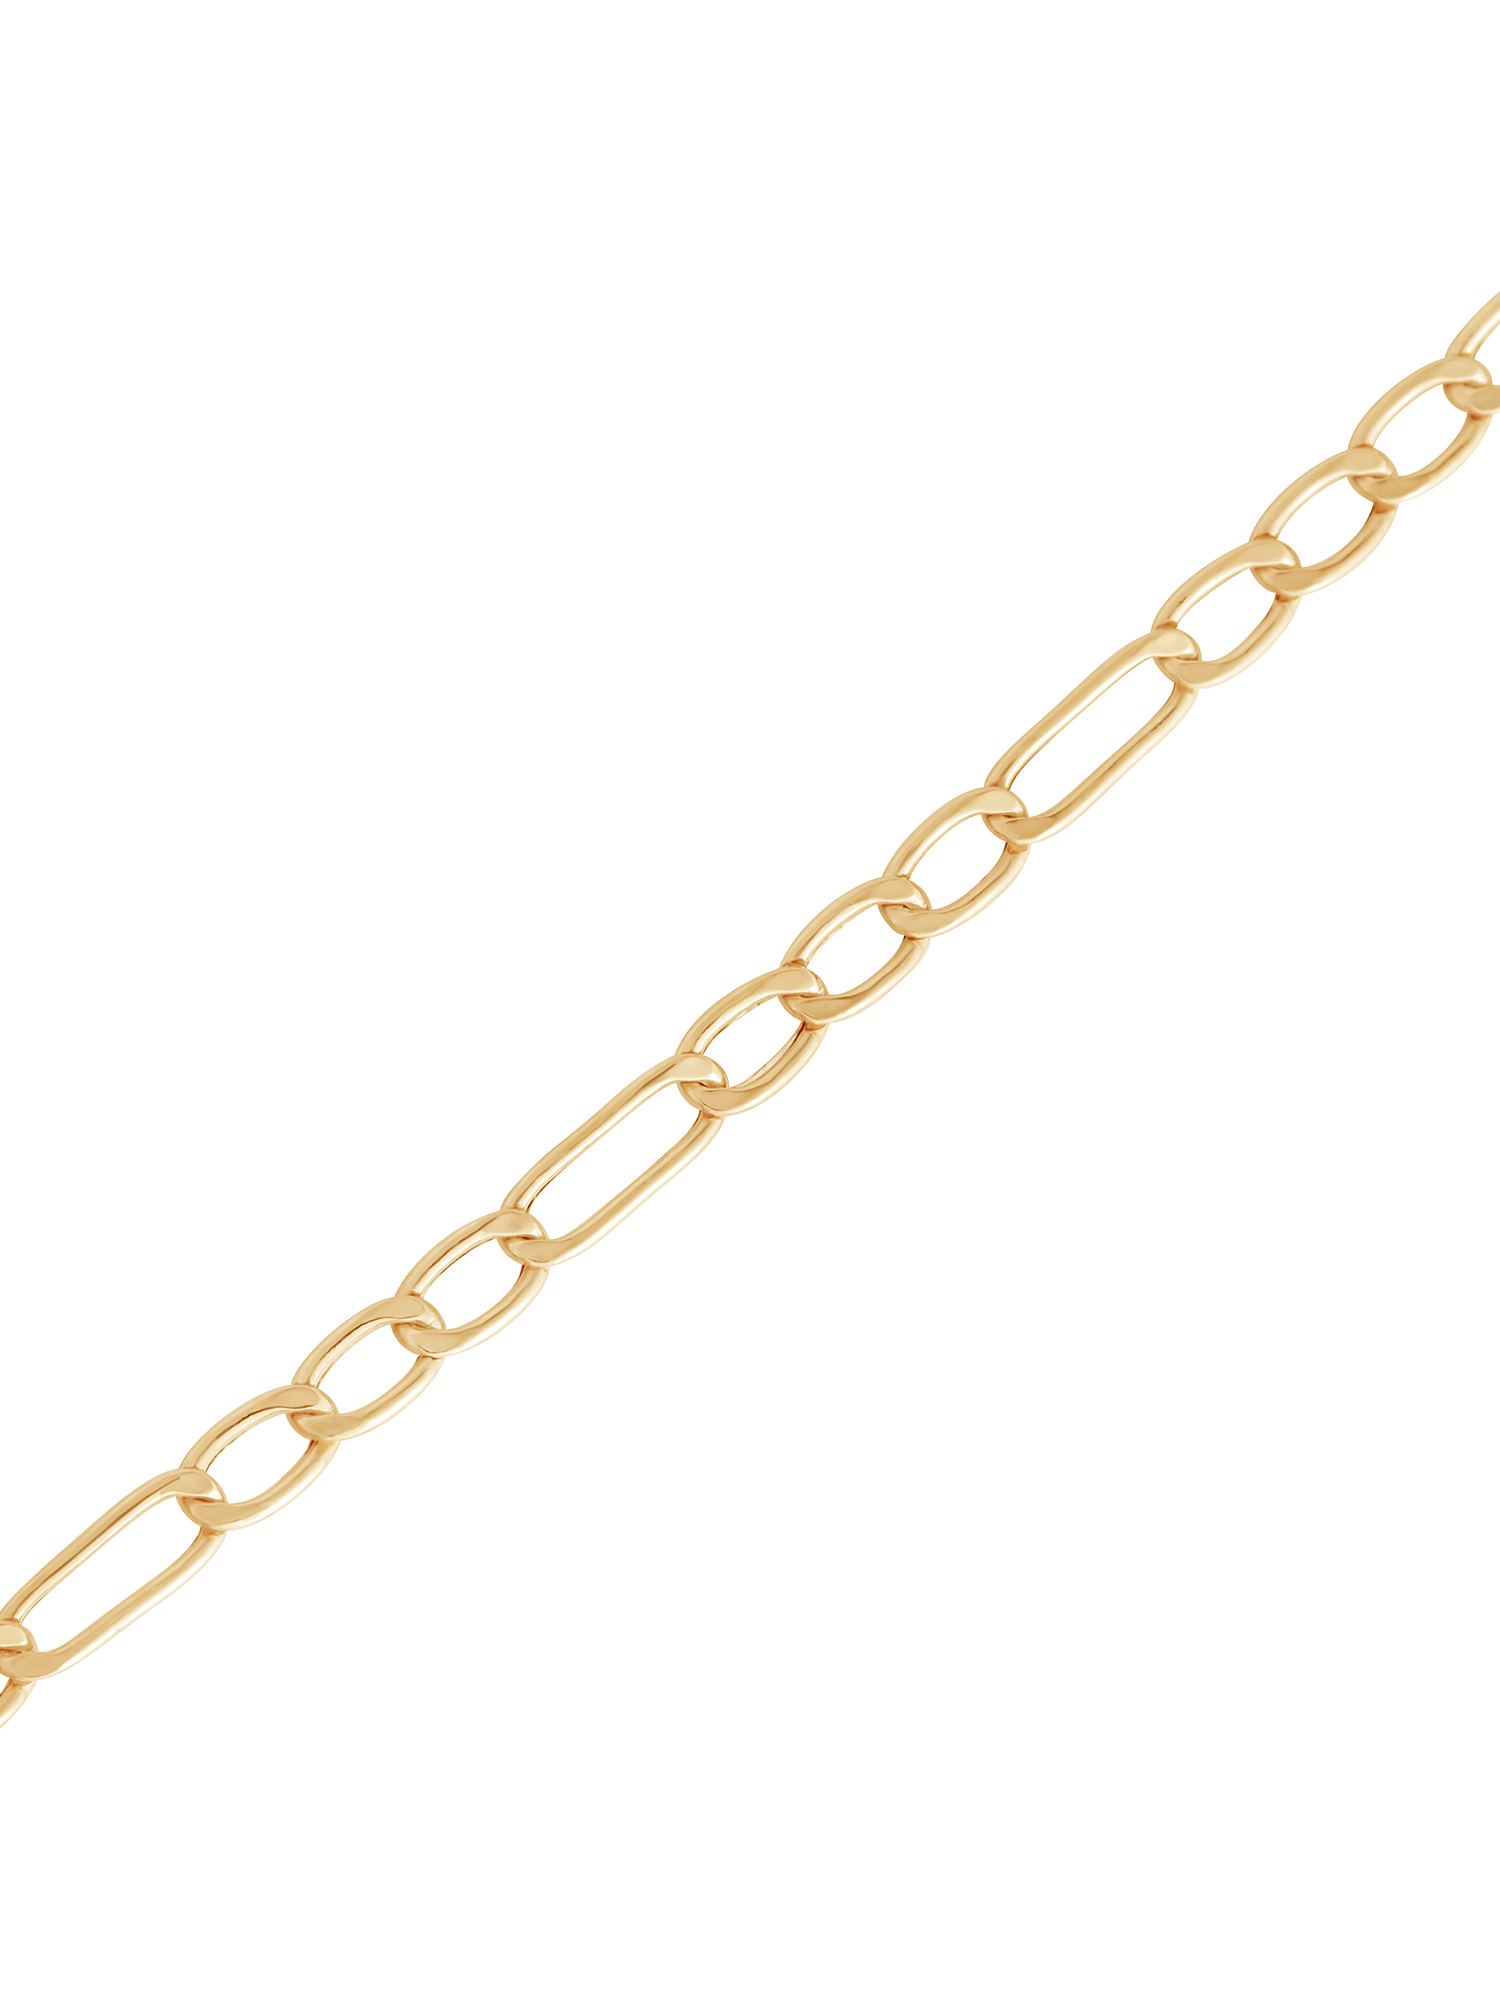 Finecraft 10K Yellow Gold 3.2MM Solid Figaro Link Necklace, 18" - image 2 of 5